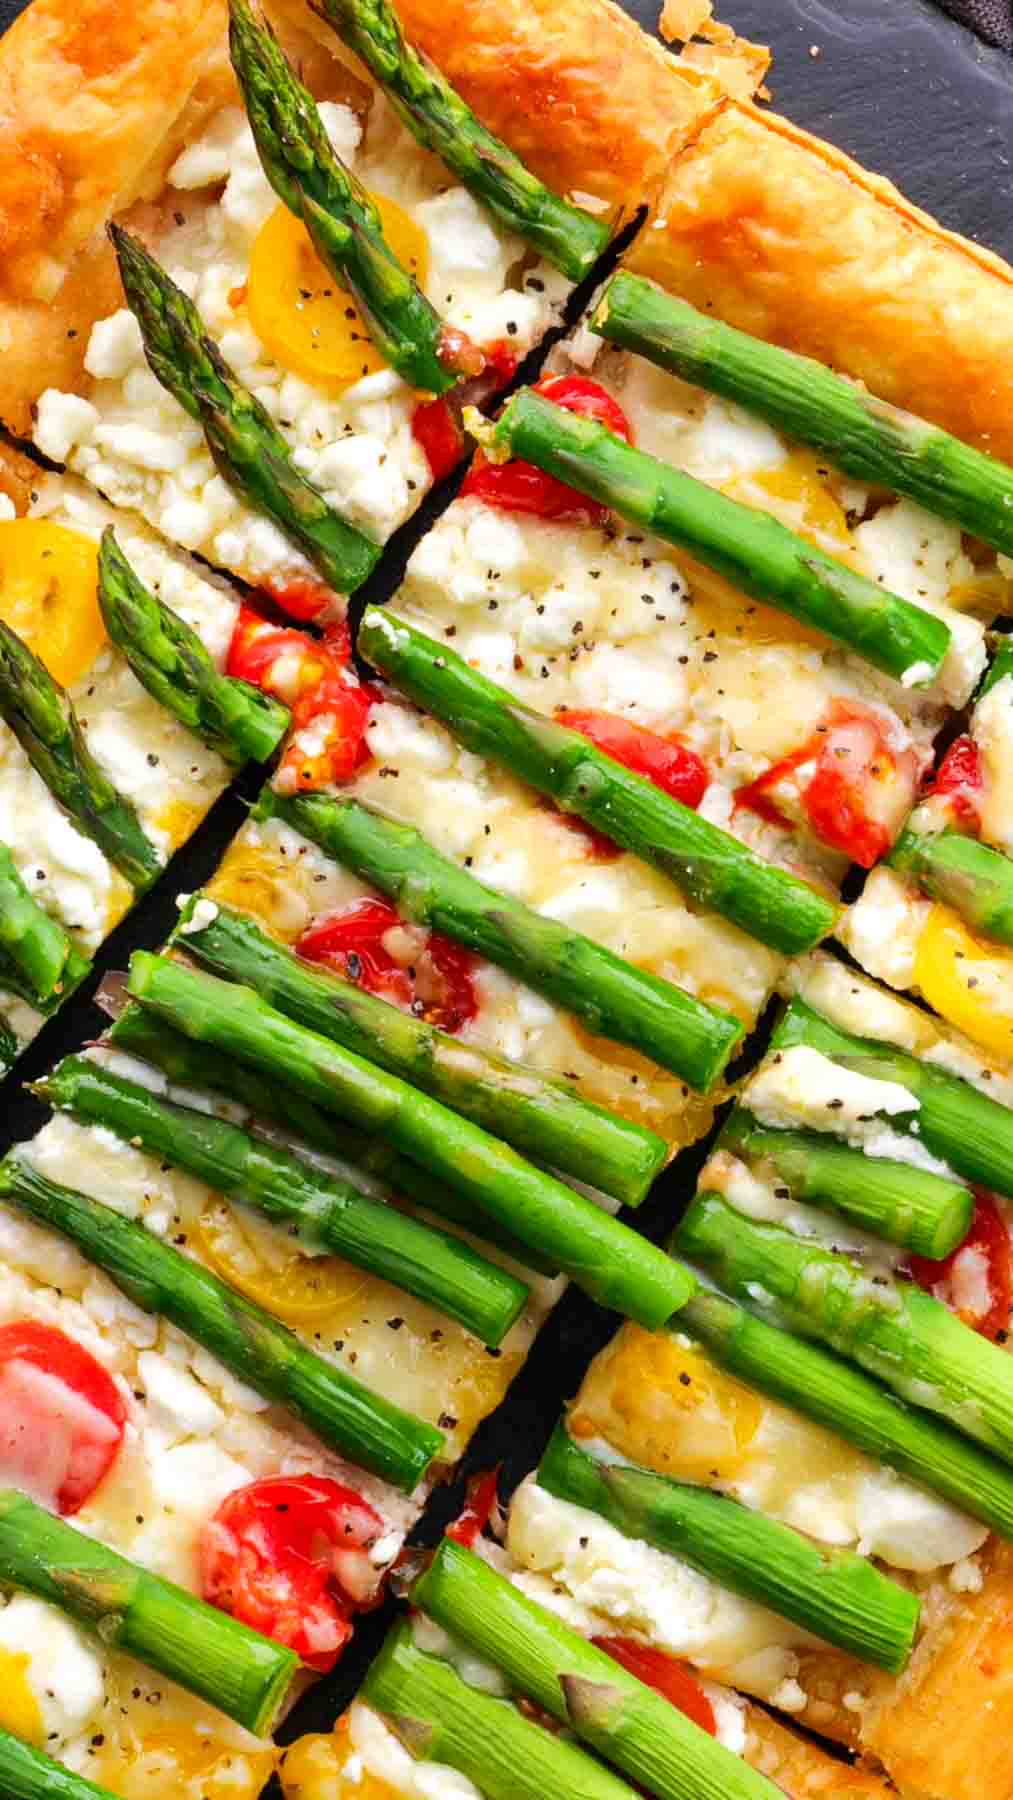 An appetizing Asparagus Goat Cheese Tart with asparagus, cheese, and tomatoes served in slices.